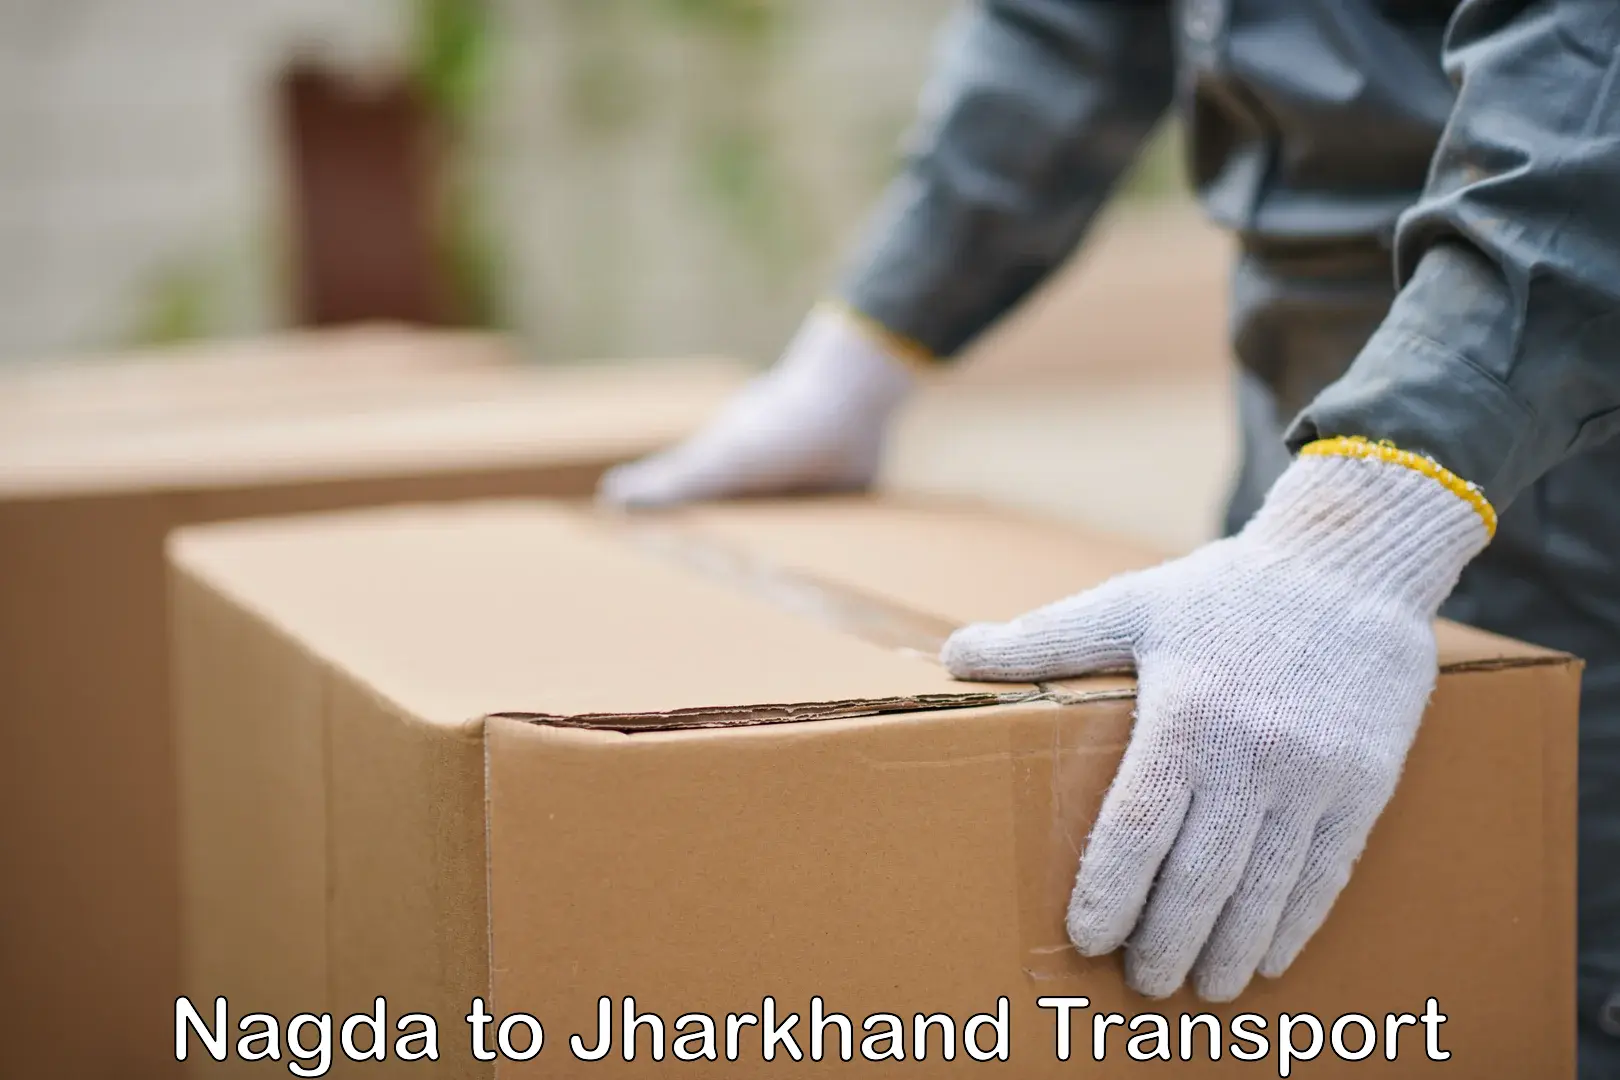 Container transport service Nagda to Ranchi